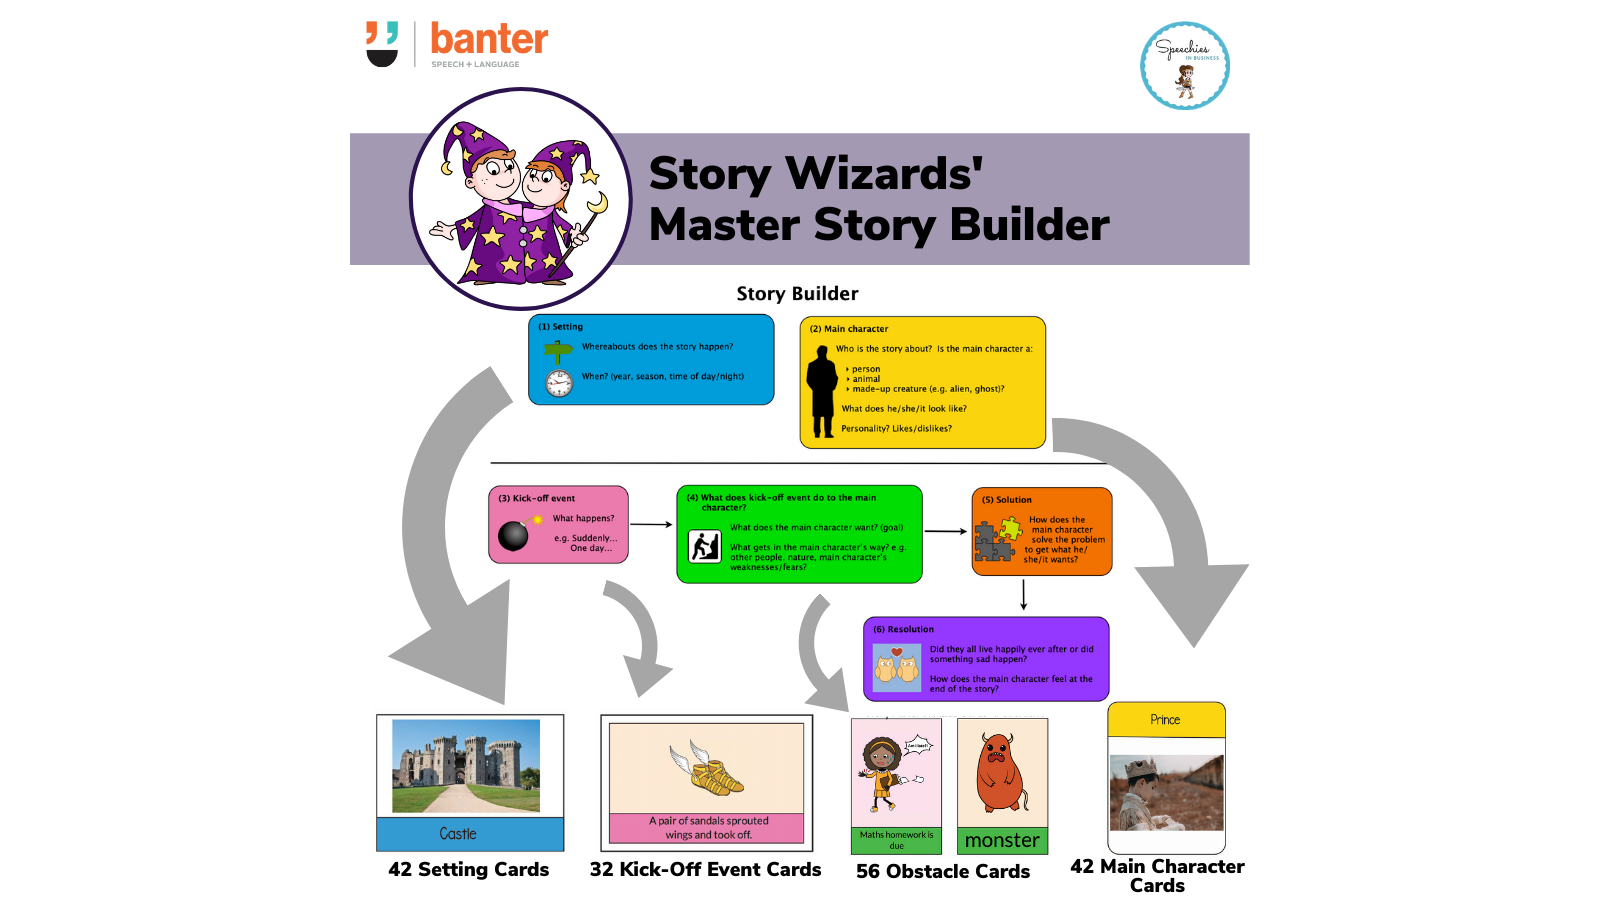 The Story Wizards' Master Story Builder